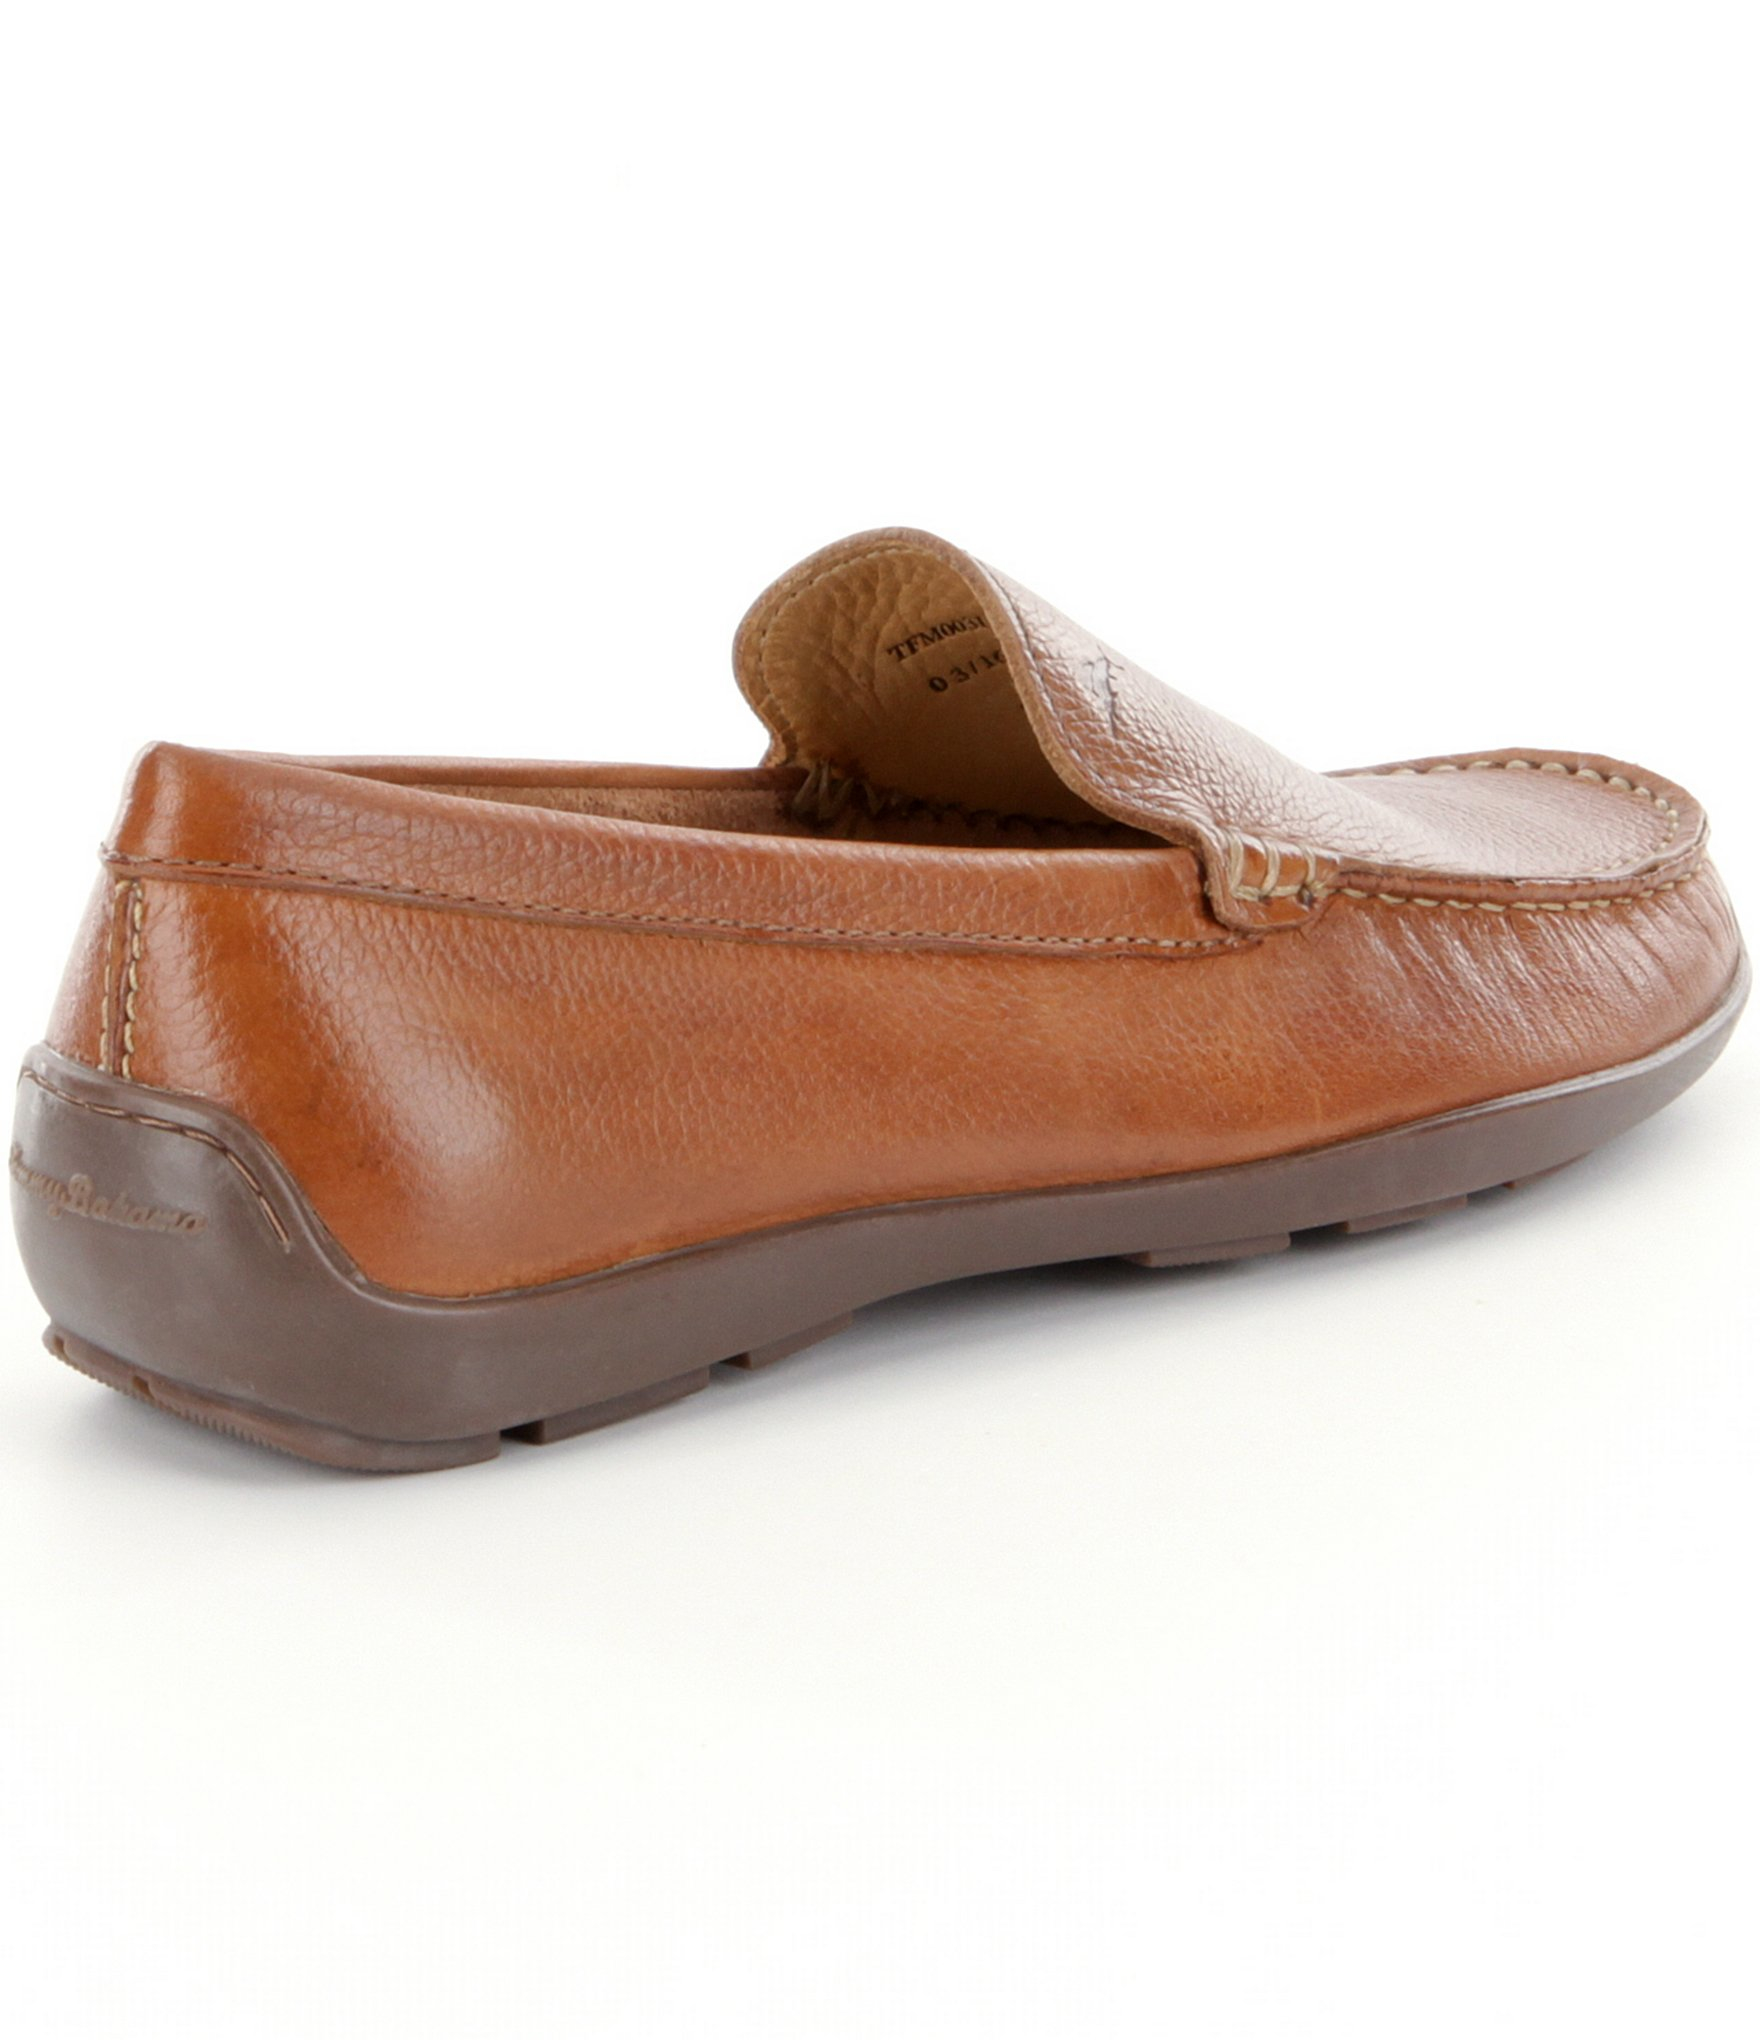 Tommy Bahama Leather Men ́s Berwin Loafers in Tan (Brown) for Men - Lyst